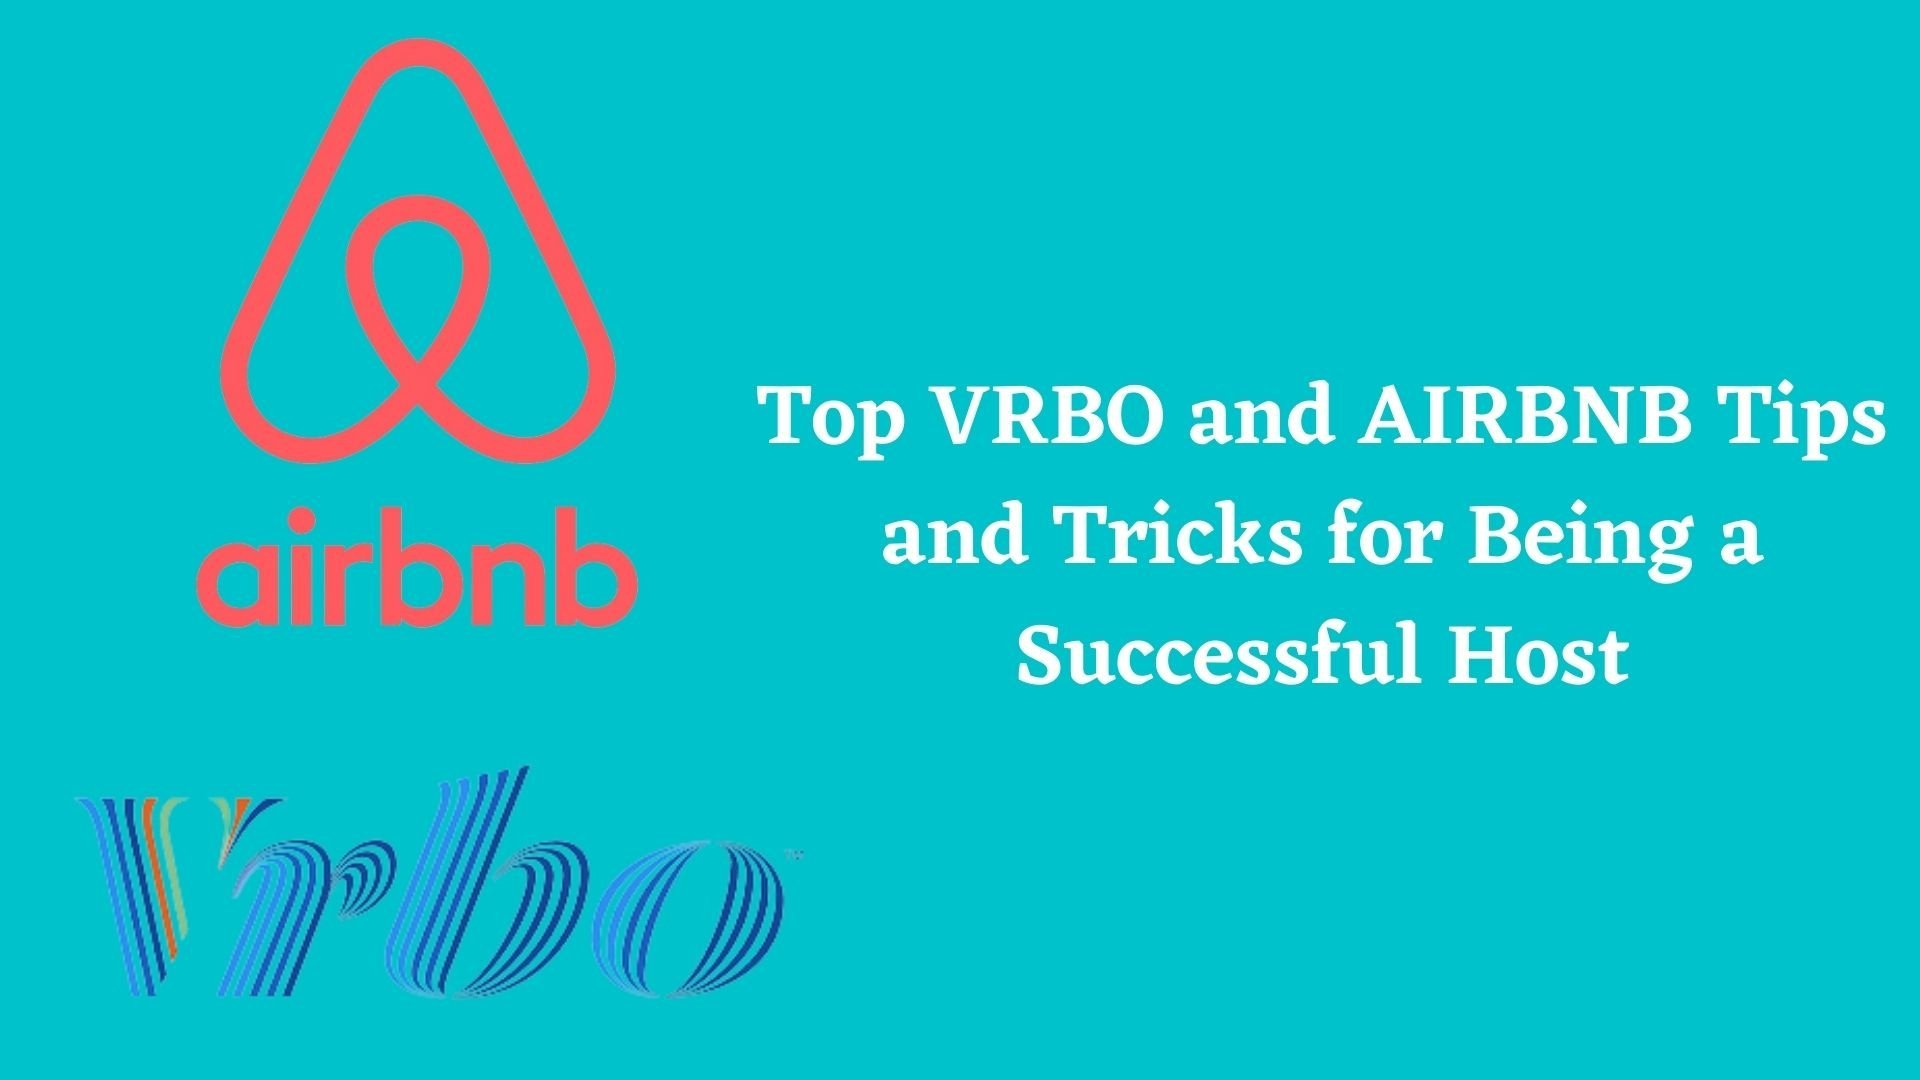 op VRBO and AIRBNB Tips and Tricks